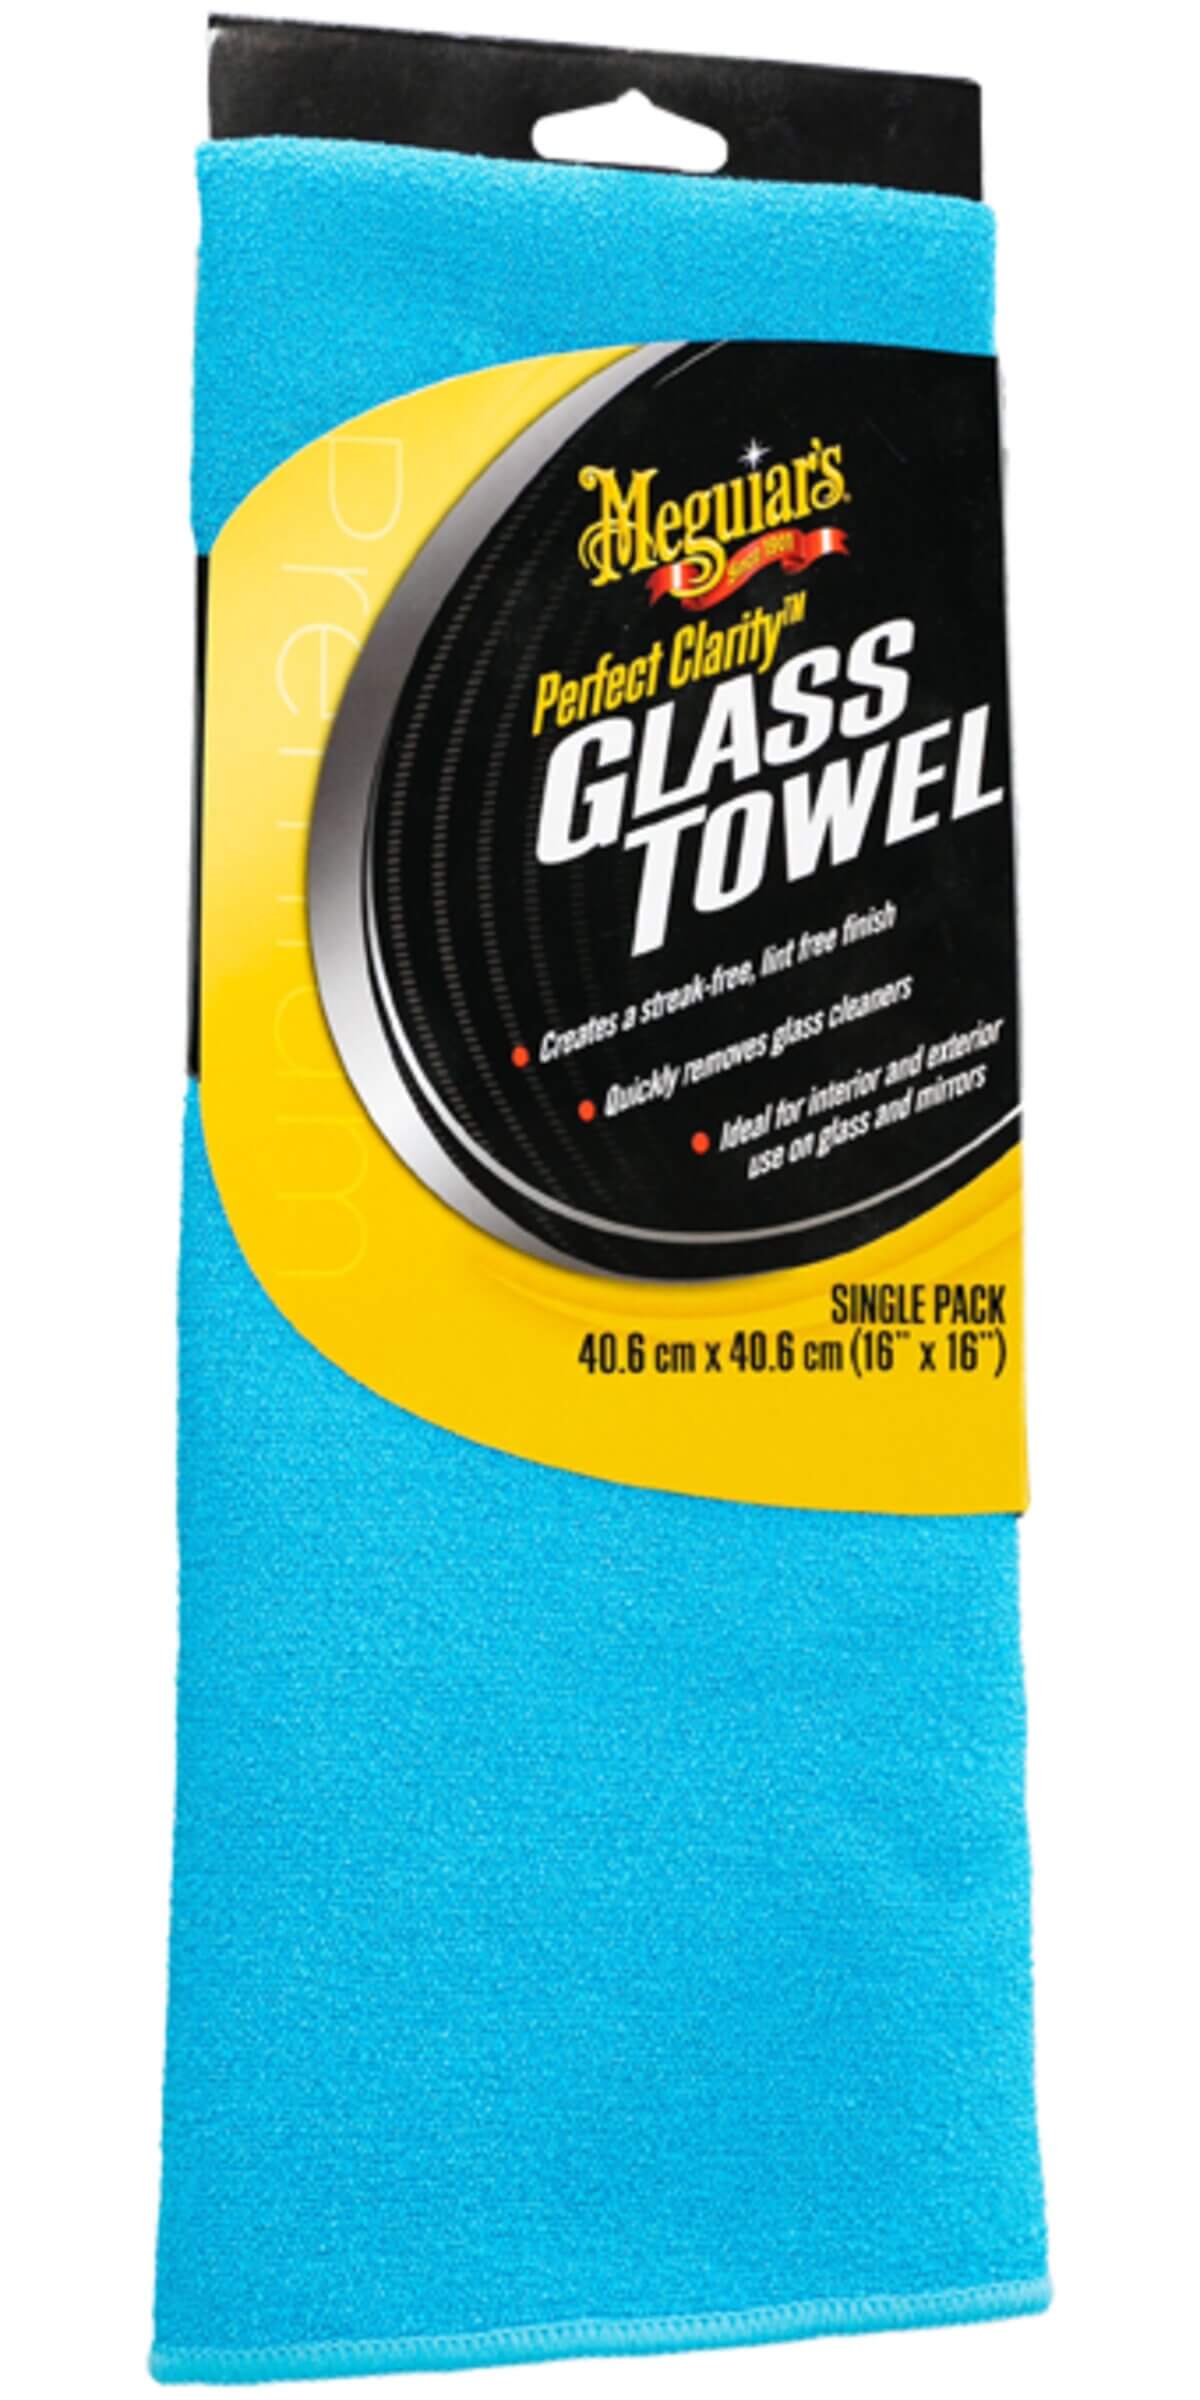 Van God verder enthousiast Meguiar's Perfect Clarity Glass Towel – Spray and All